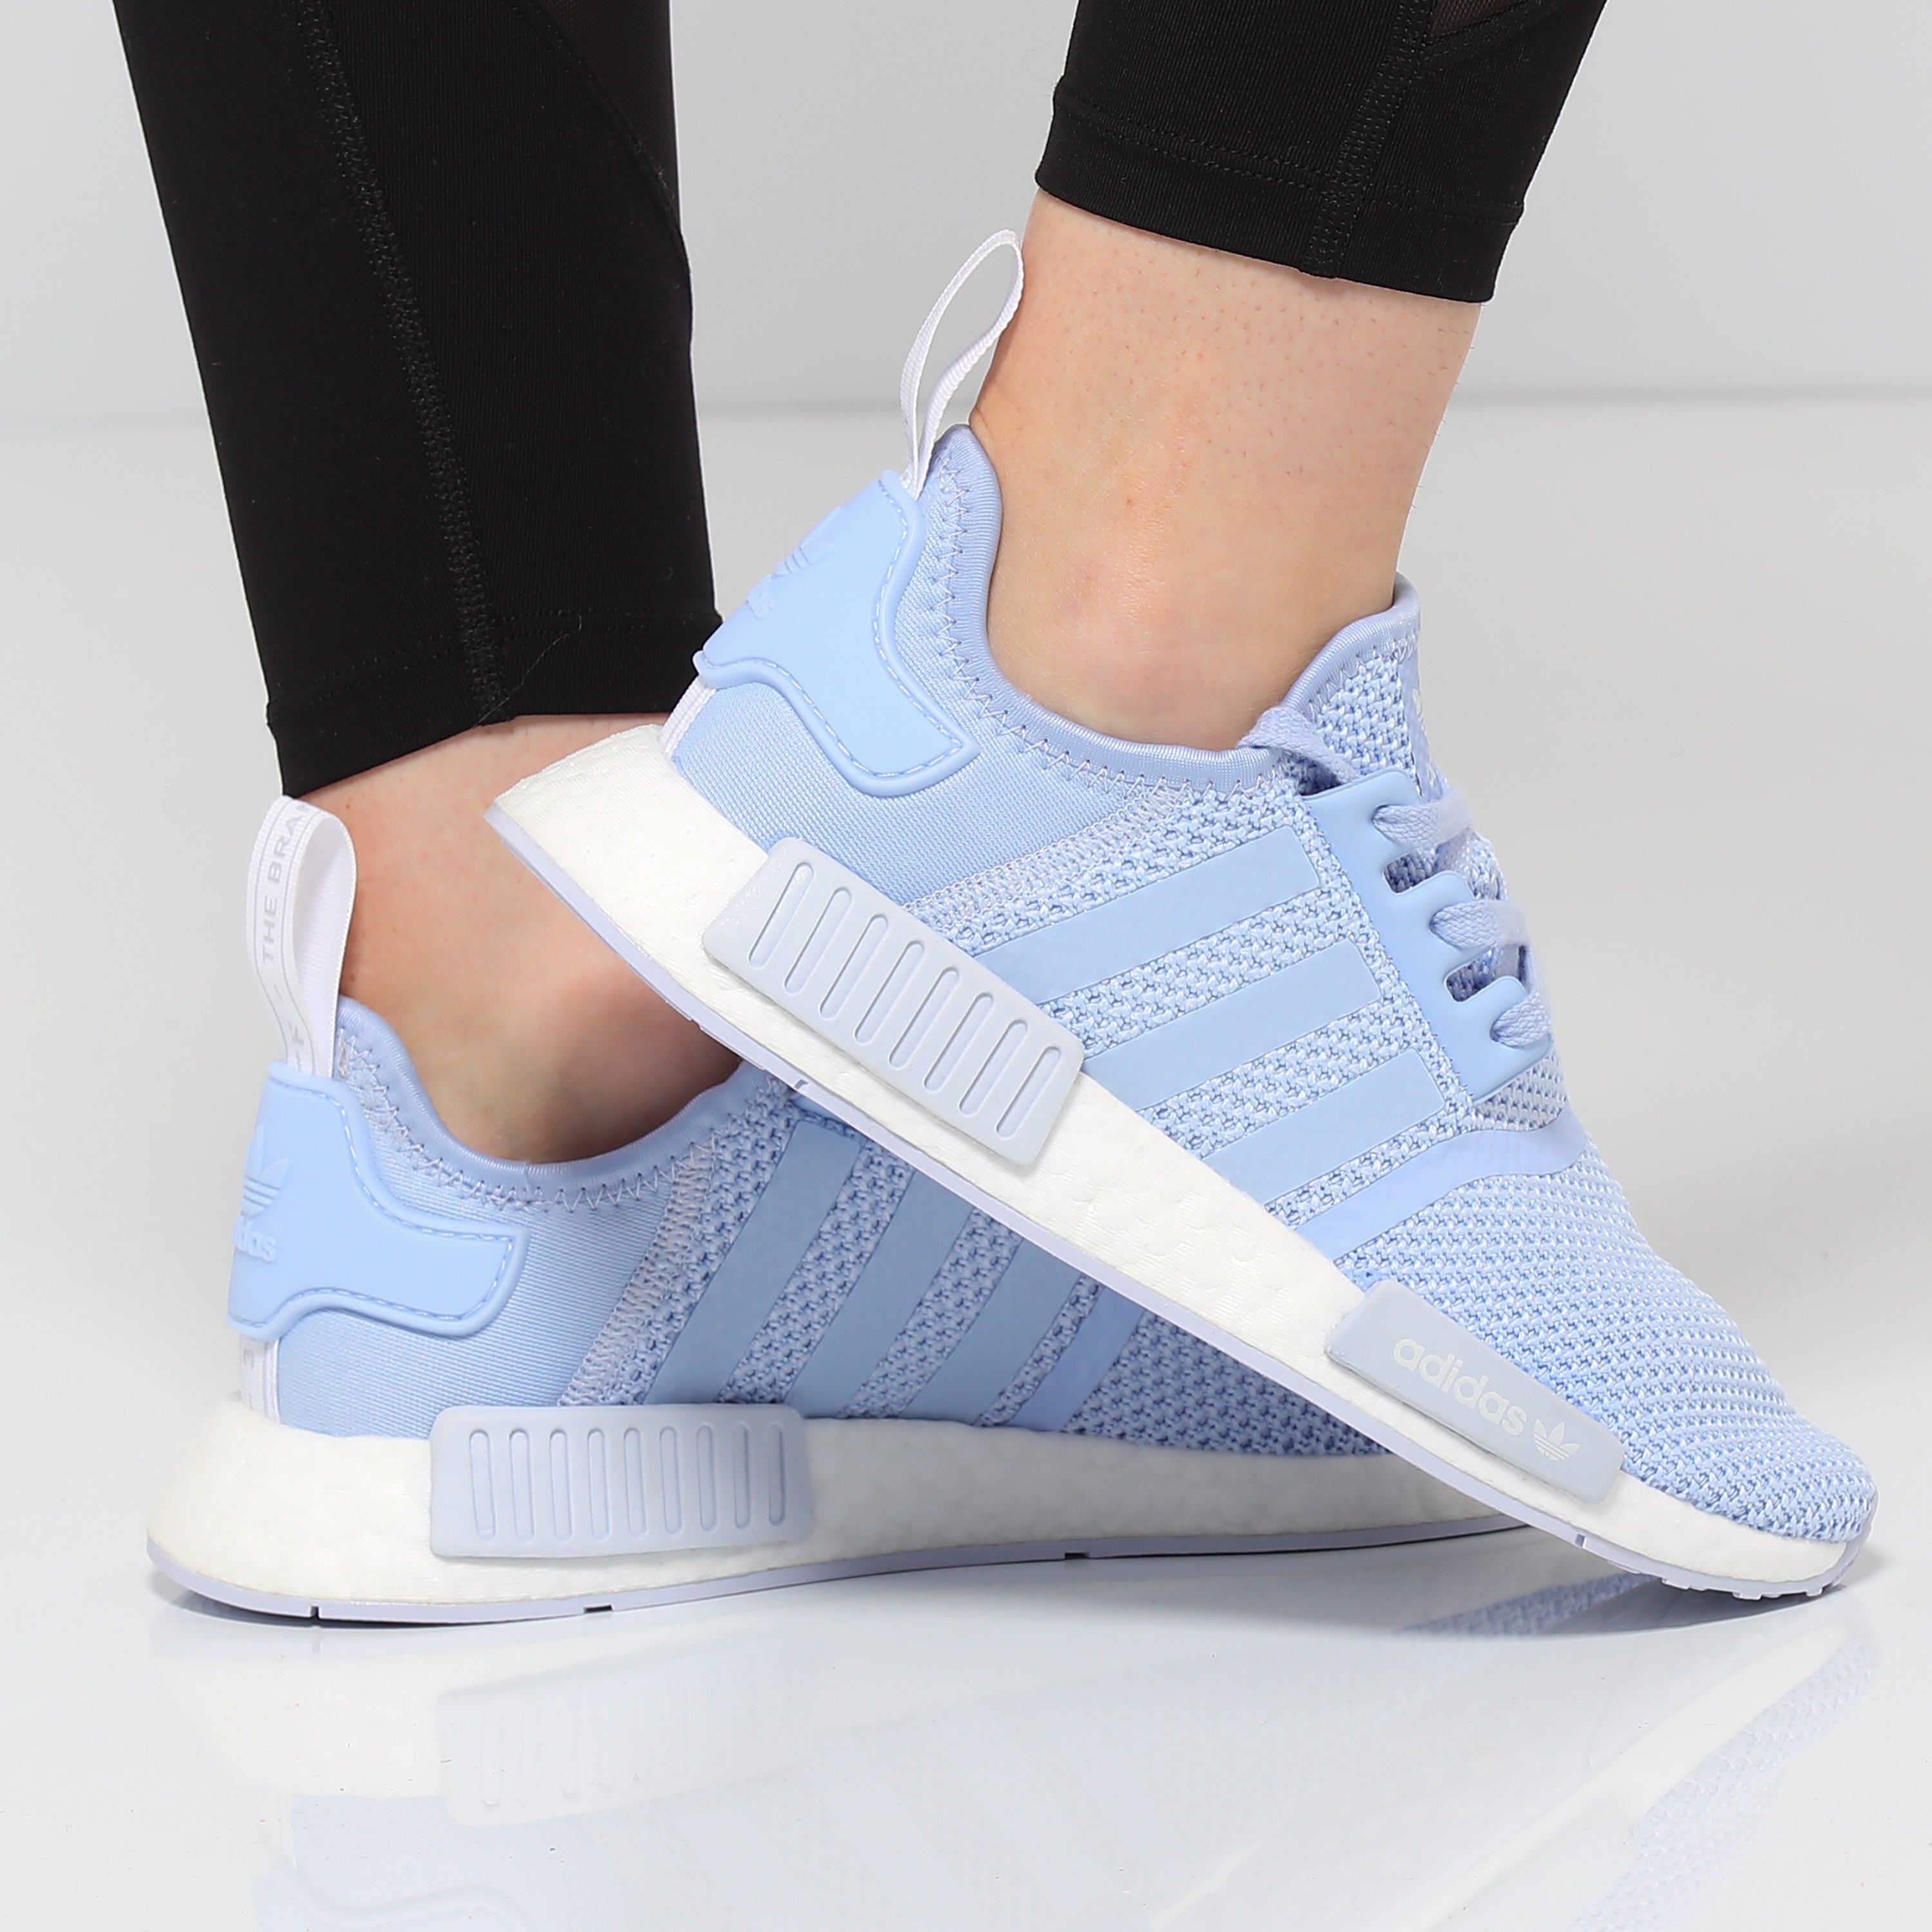 blue and white nmd r1